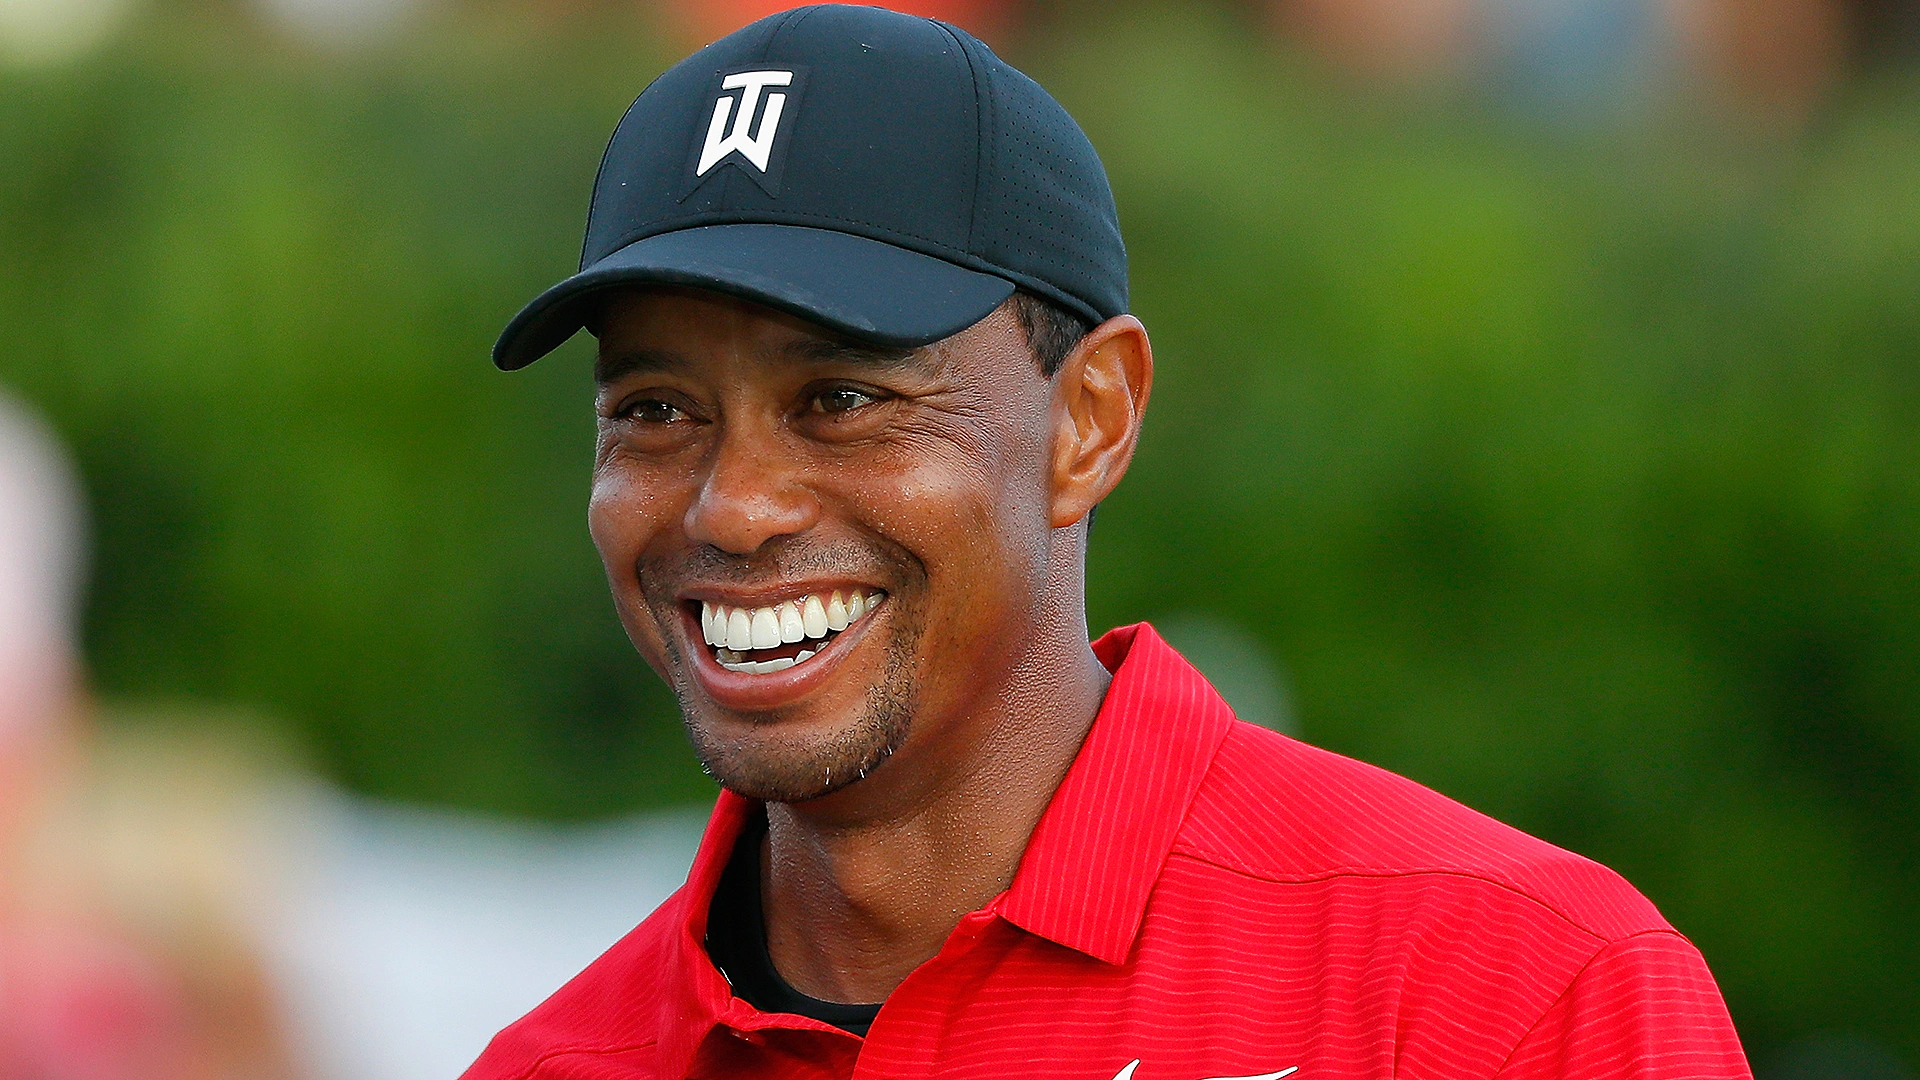 Report: Woods turned down lucrative appearance fee for Saudi event